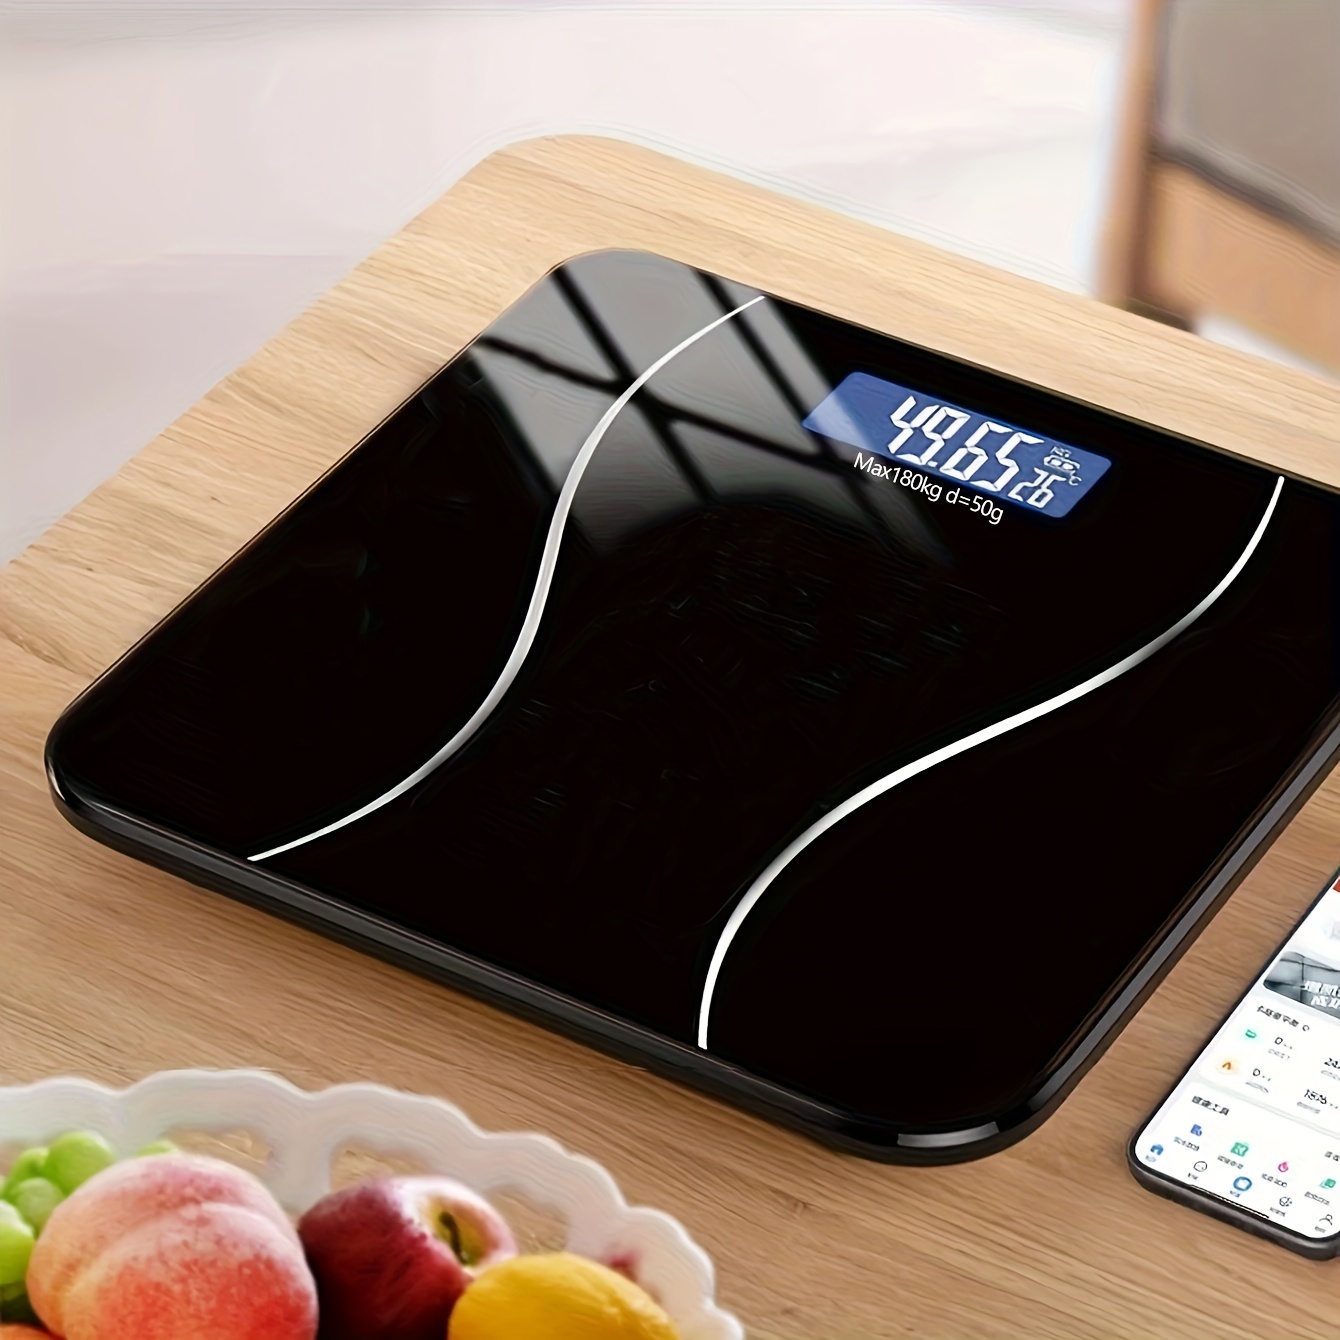 

1pc Digital Bathroom Scale With Lighted Led Display, High Accuracy, 180kg Max, Step-on Technology, 5mm Thick Tempered Glass Platform, Anti-skid, Battery Operated (2 Aaa Excluded), Modern Design